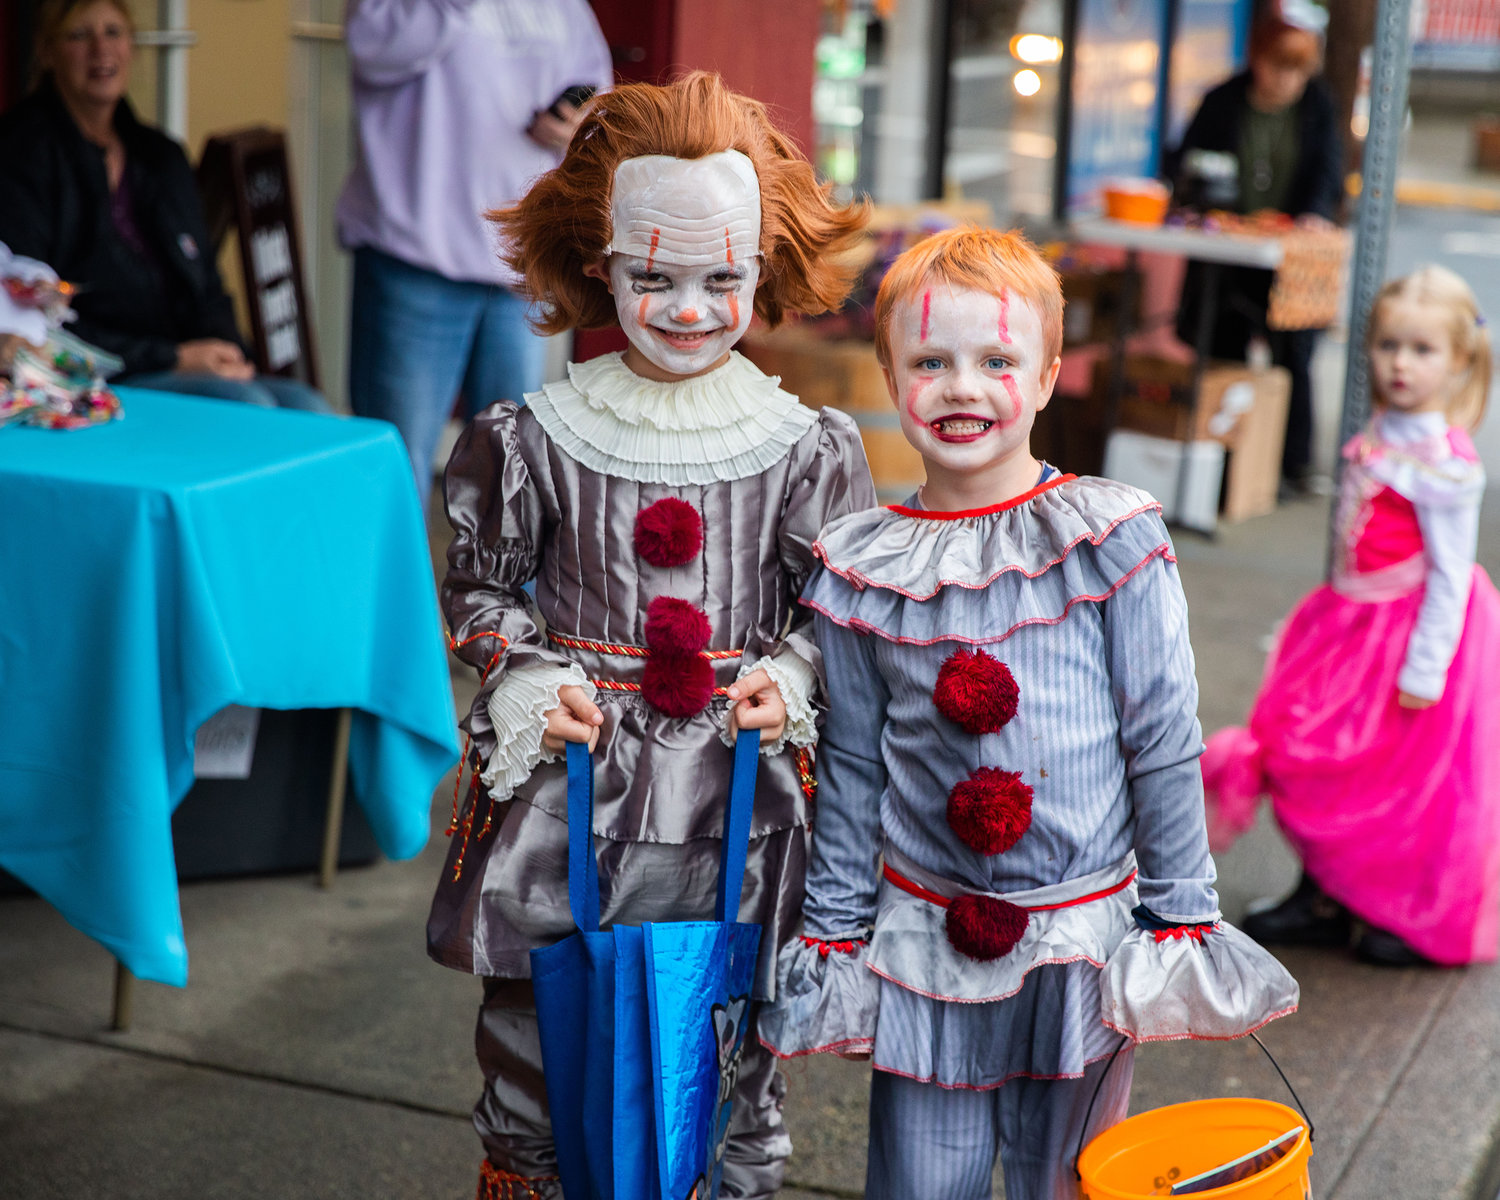 Riley Morton and Garrett Small smile for a photo in matching Pennywise costumes in downtown Winlock on Halloween.